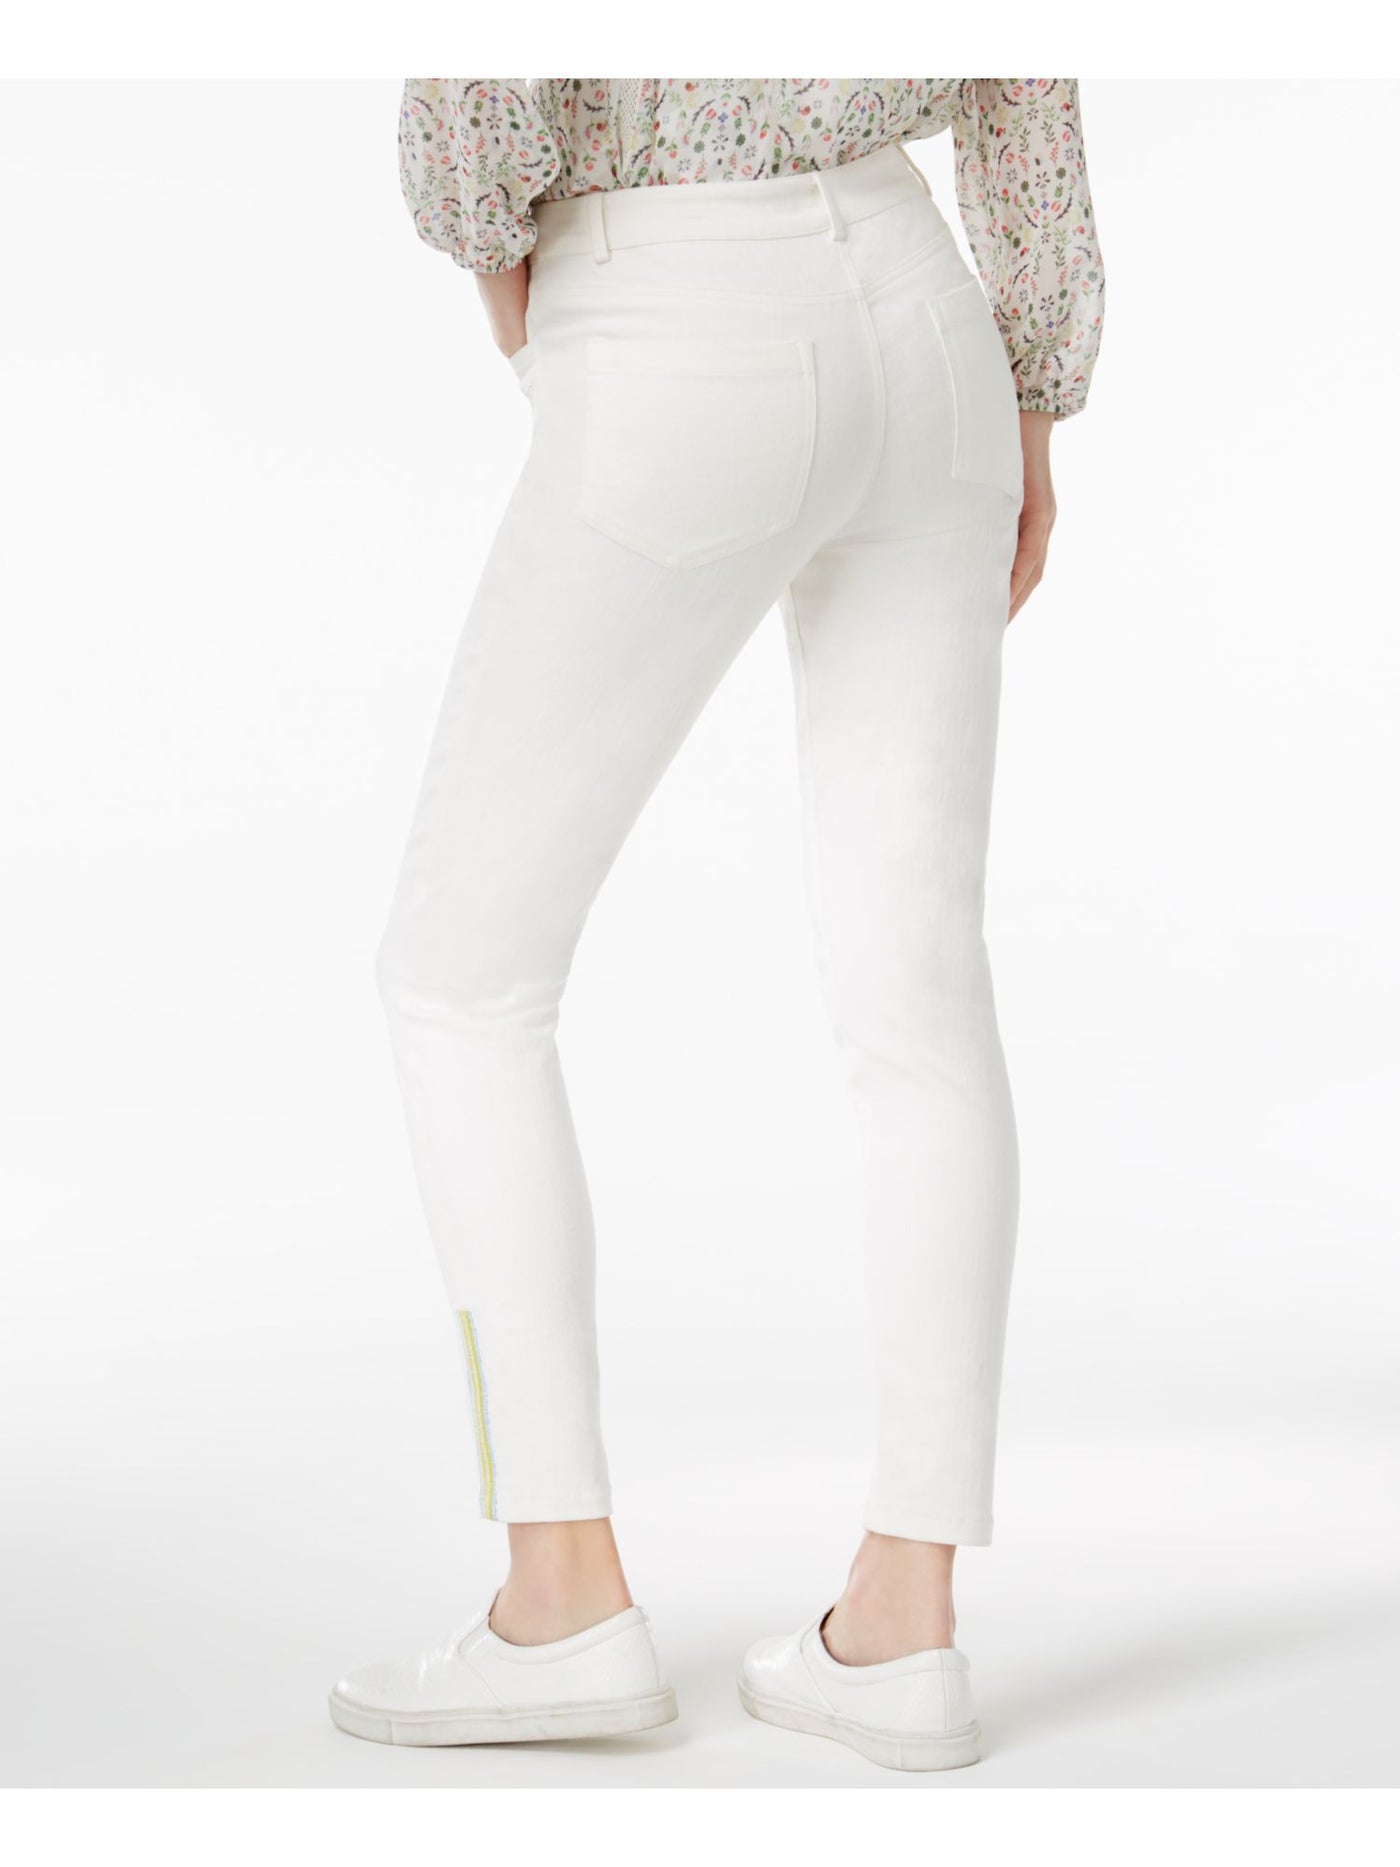 CYNTHIA ROWLEY Womens White Embroidered Skinny Jeans 12